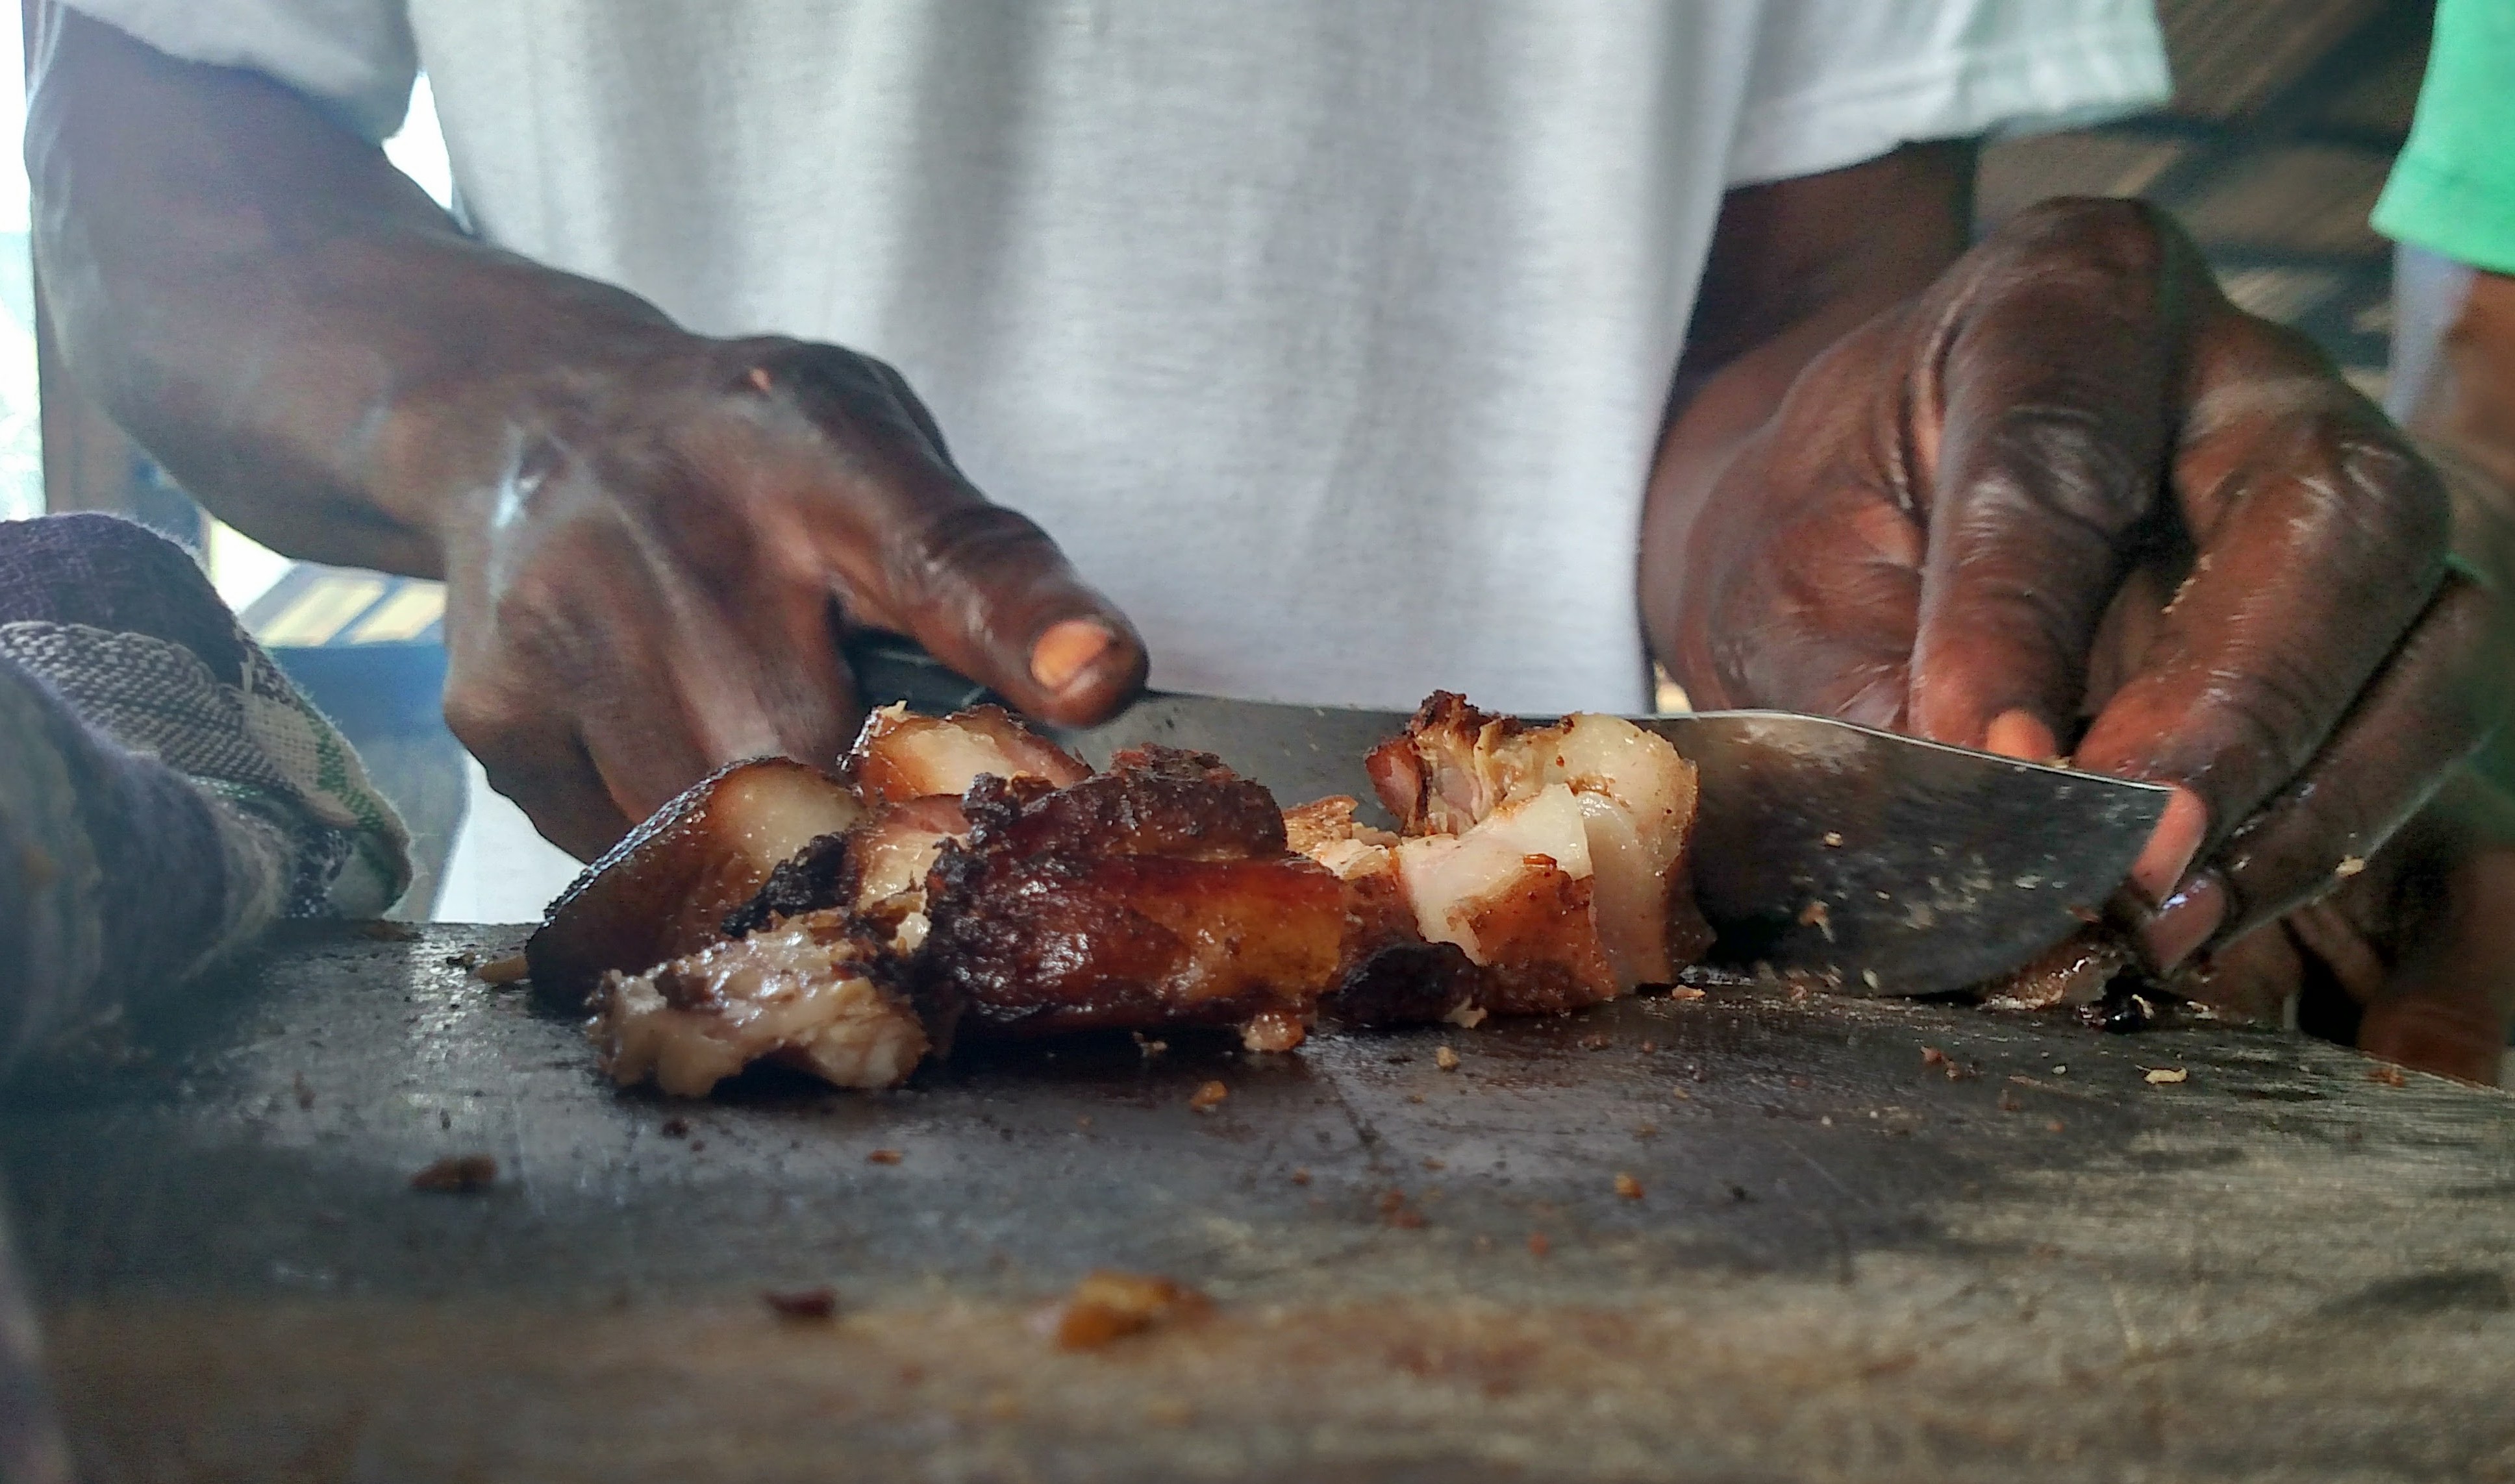 A butcher in Boston, Jamaica cuts up jerk pork for customers.